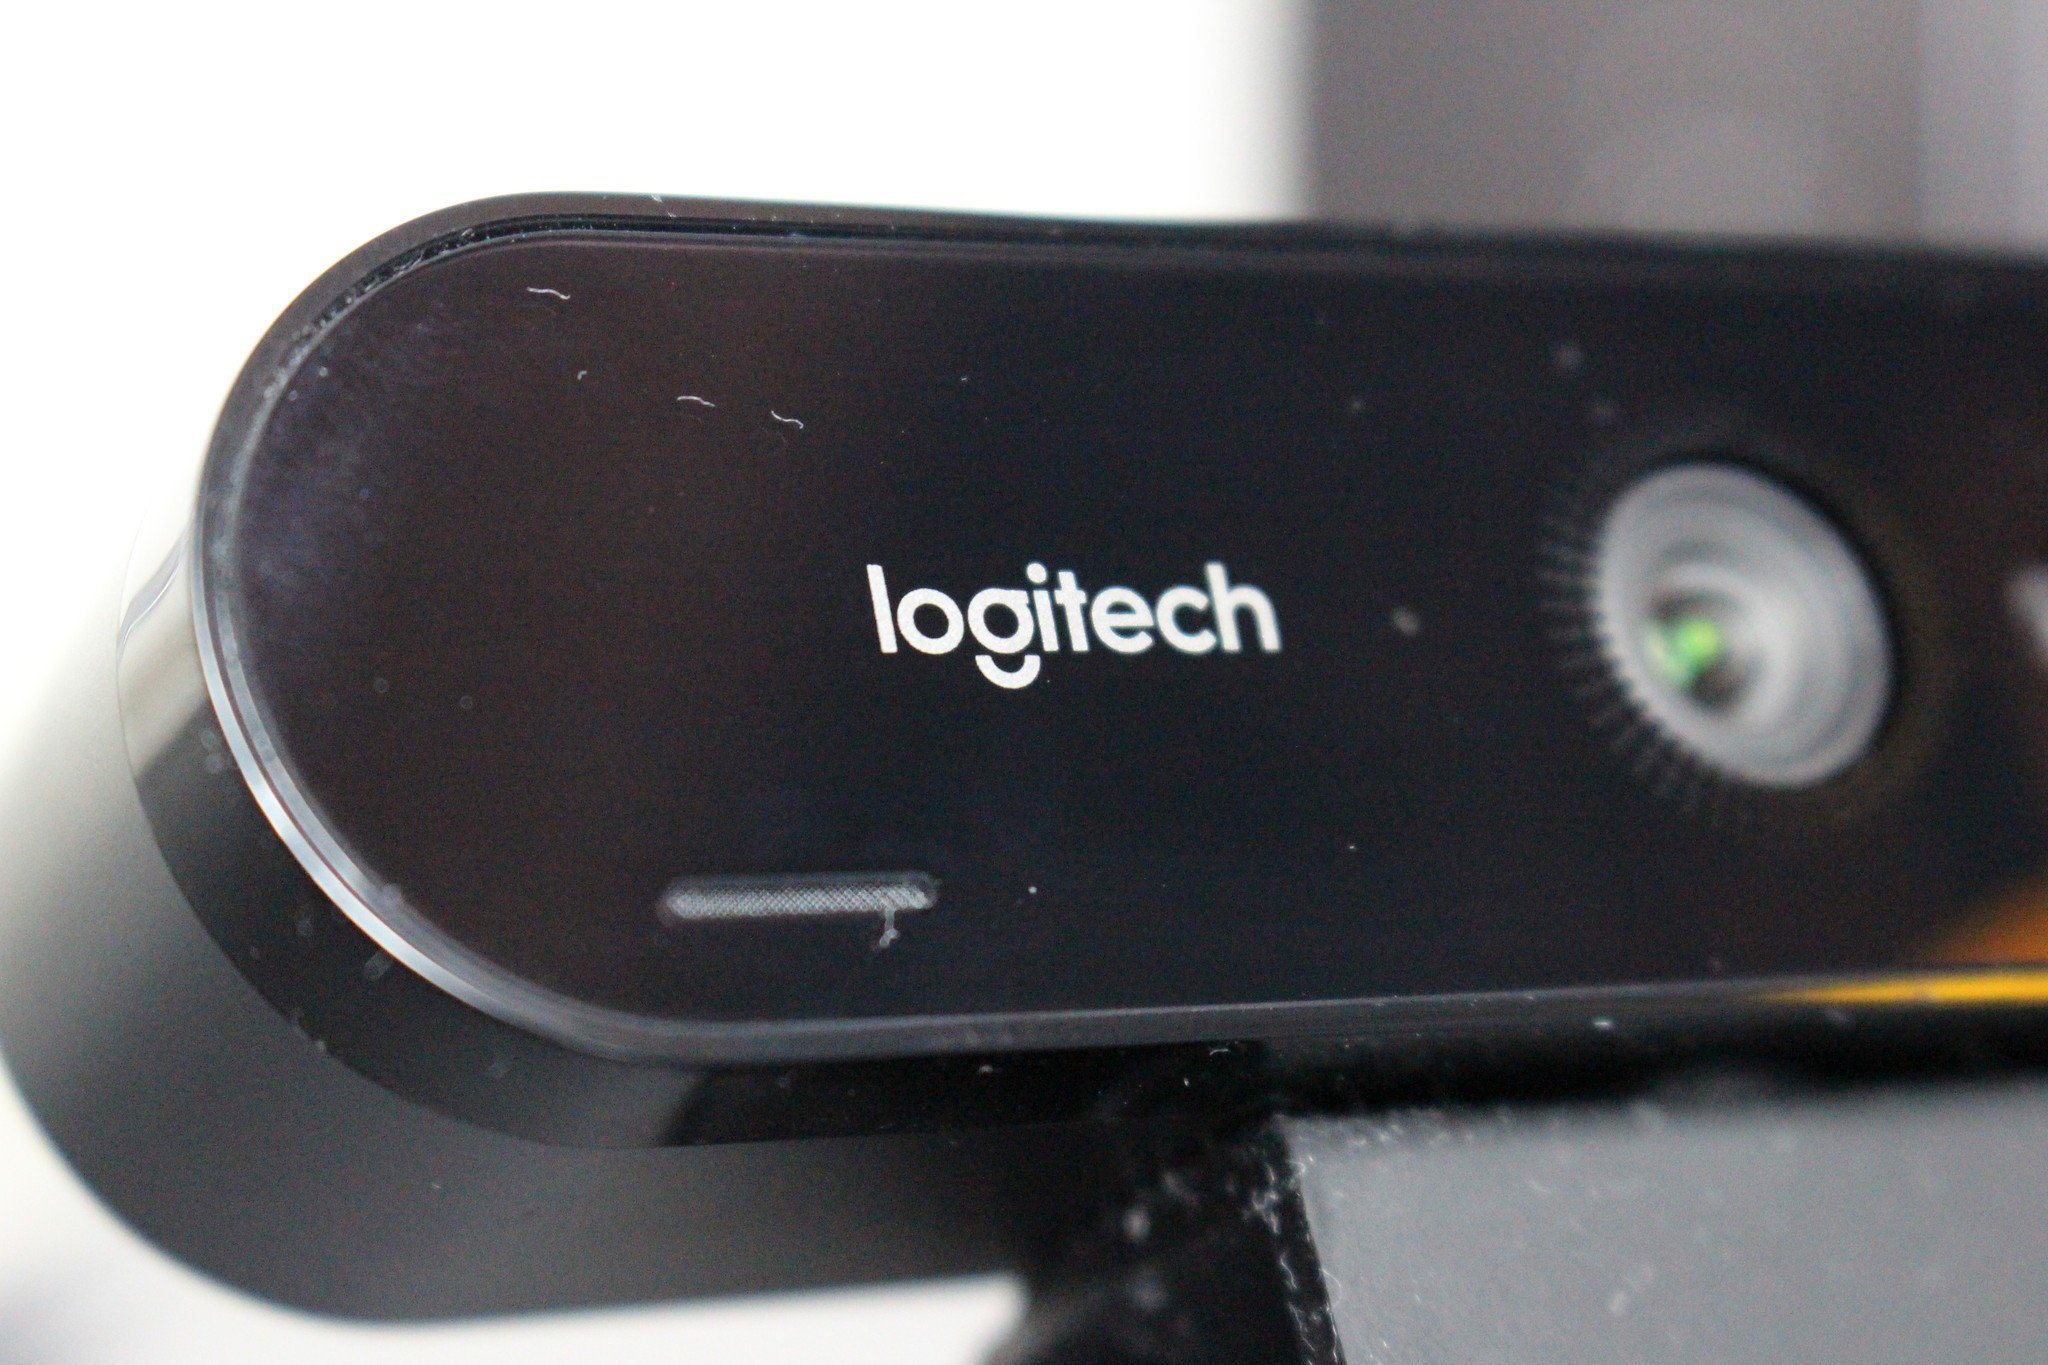 What software or apps are needed to run the Logitech c270 webcam?